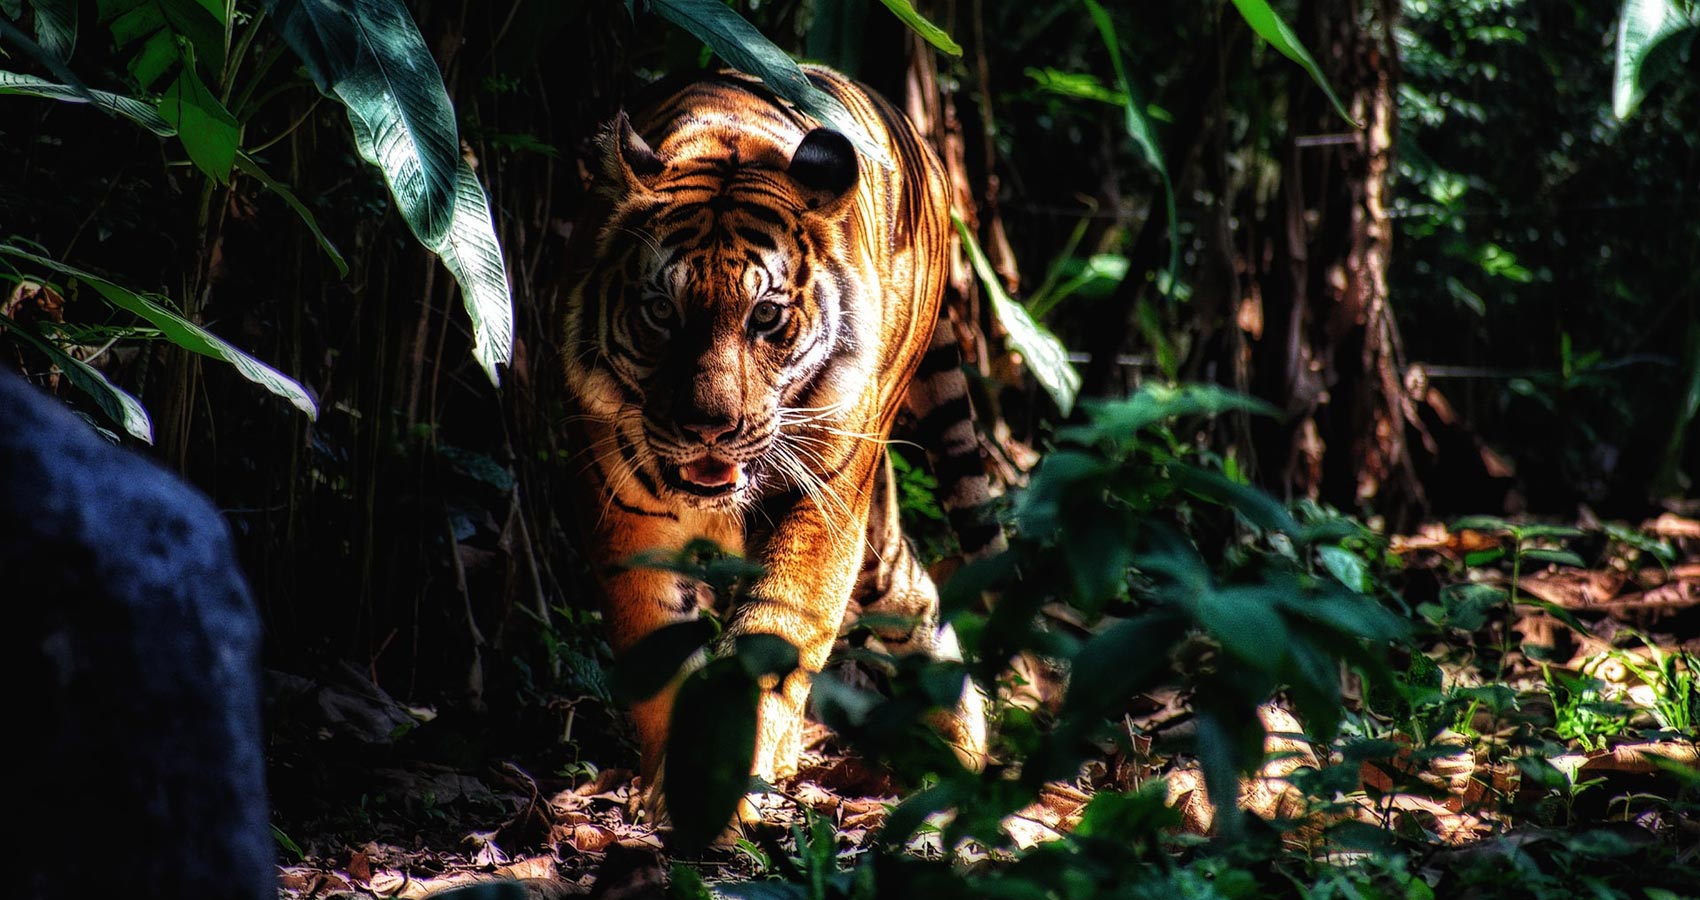 Earning Tigar, a poem by Gerry Stefanson at Spillwords.com